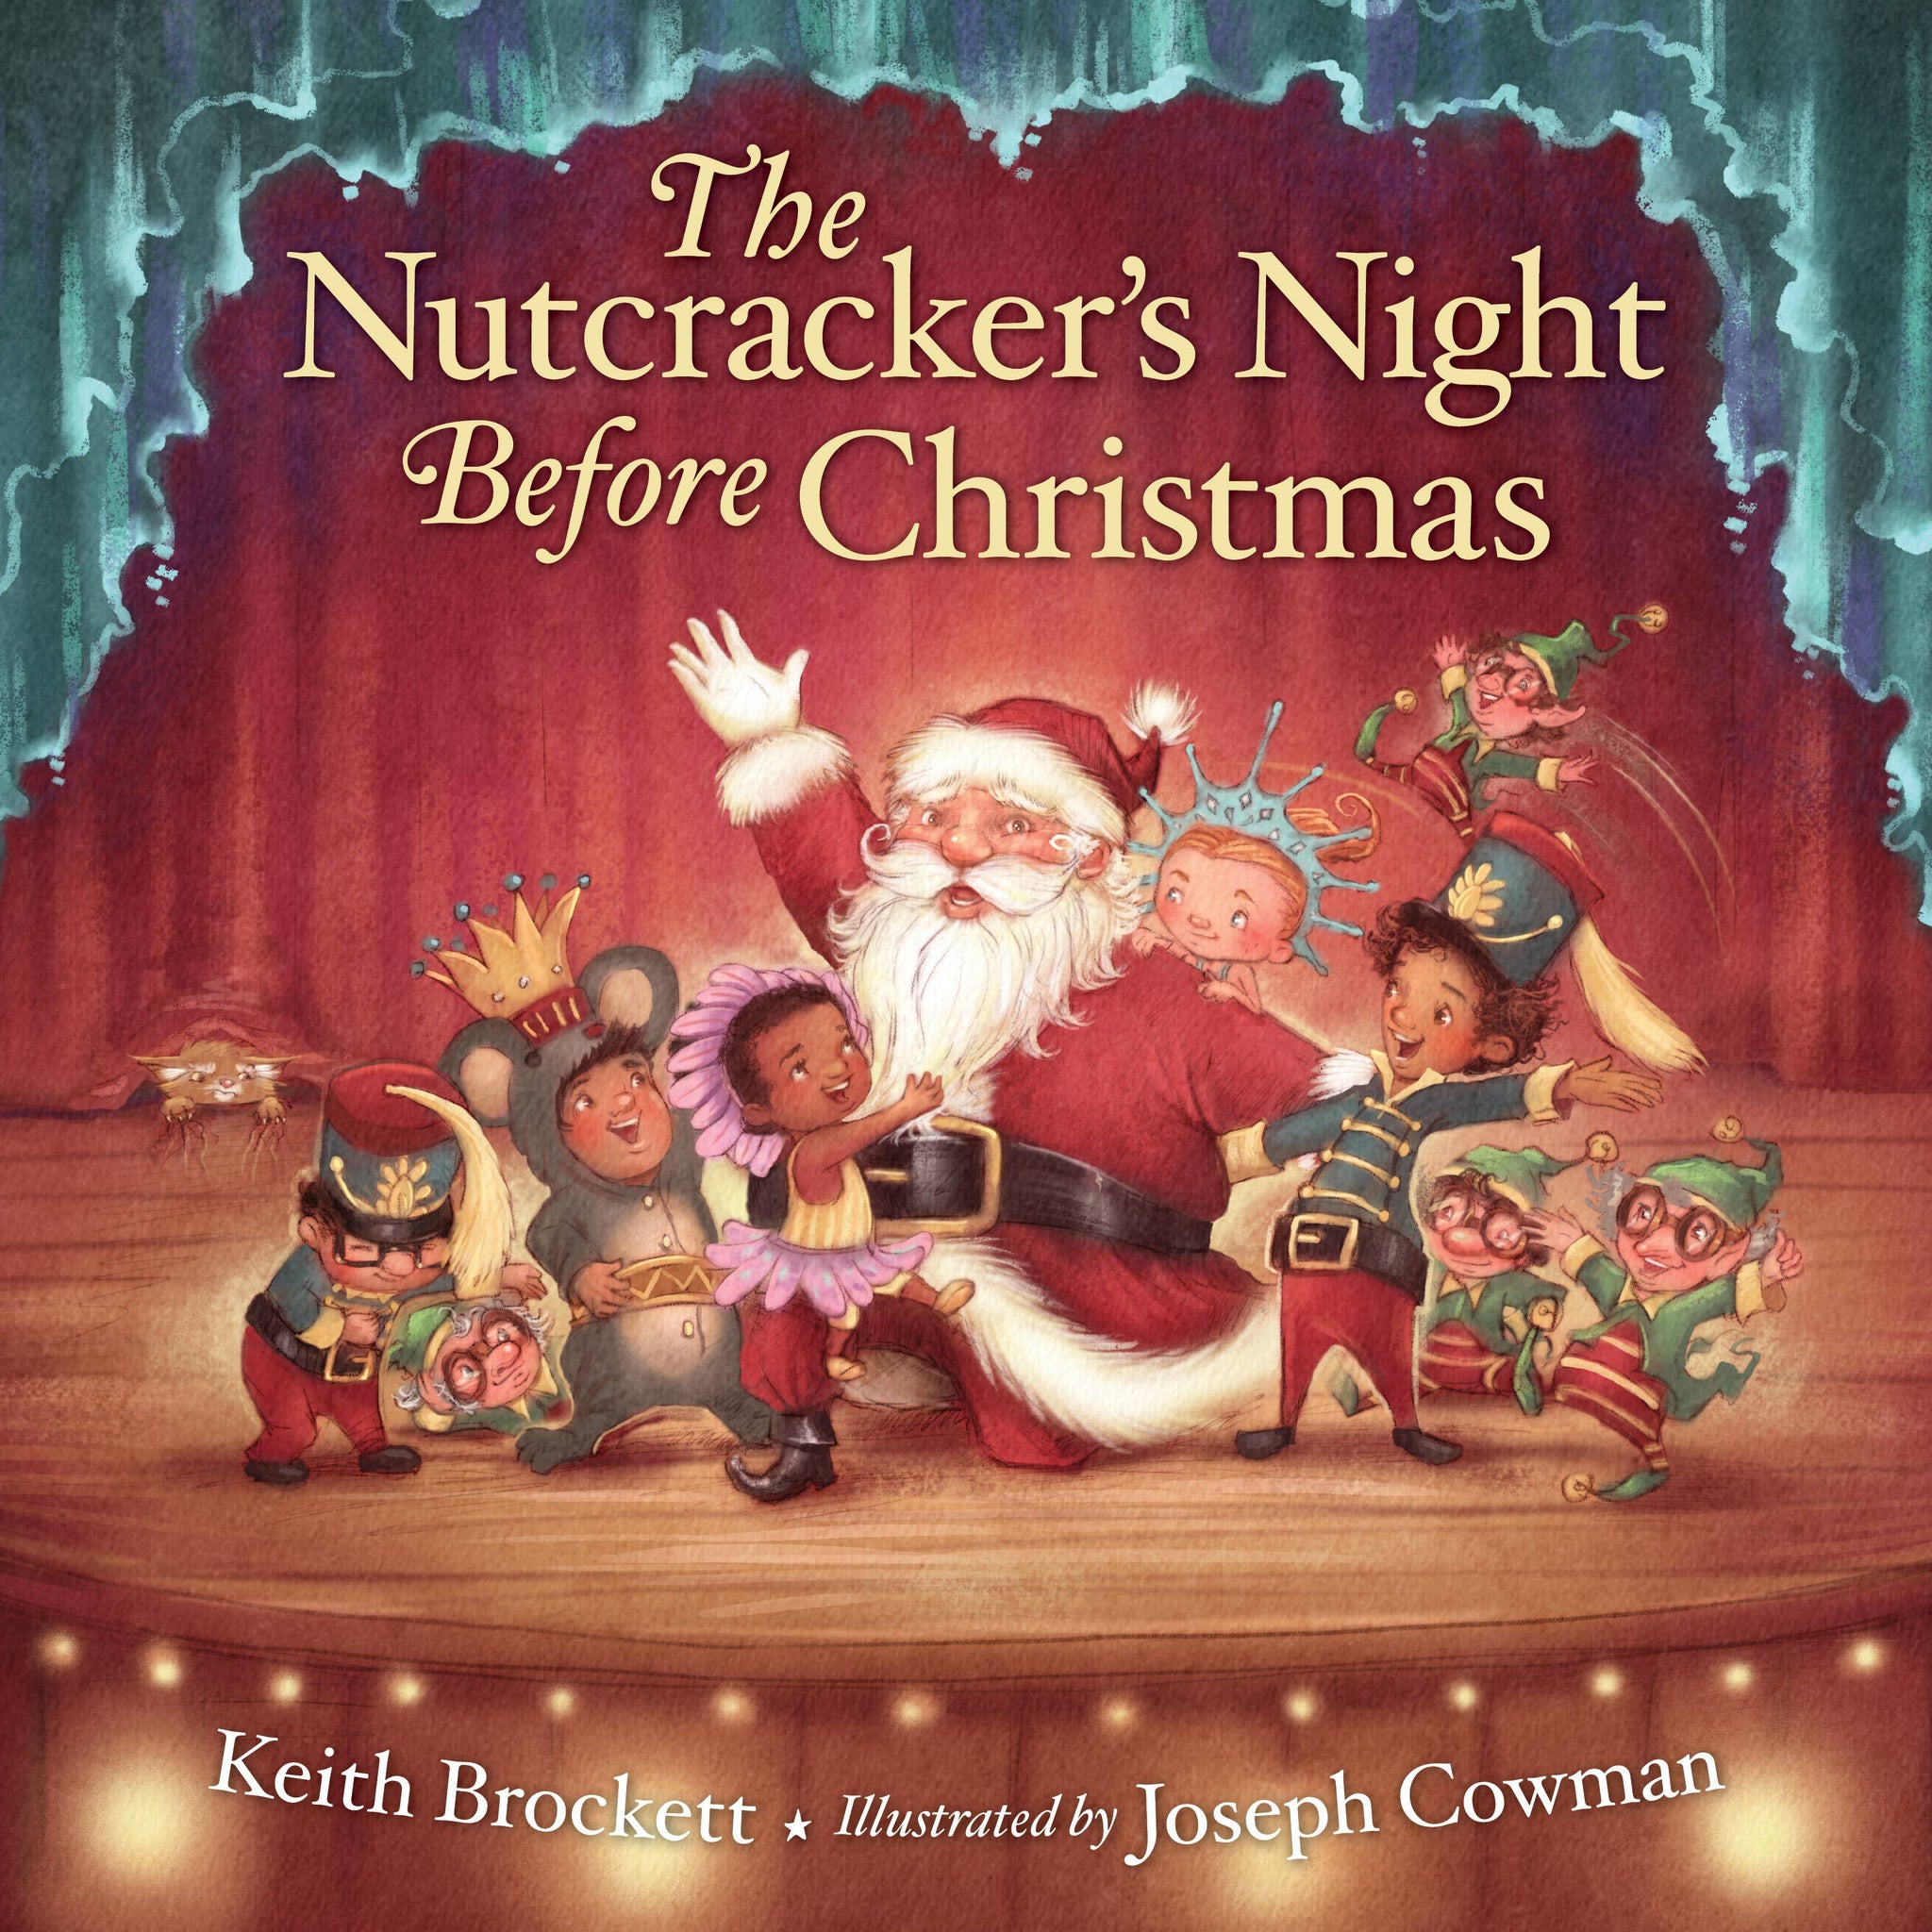 The Nutcracker's Night Before Christmas picture book